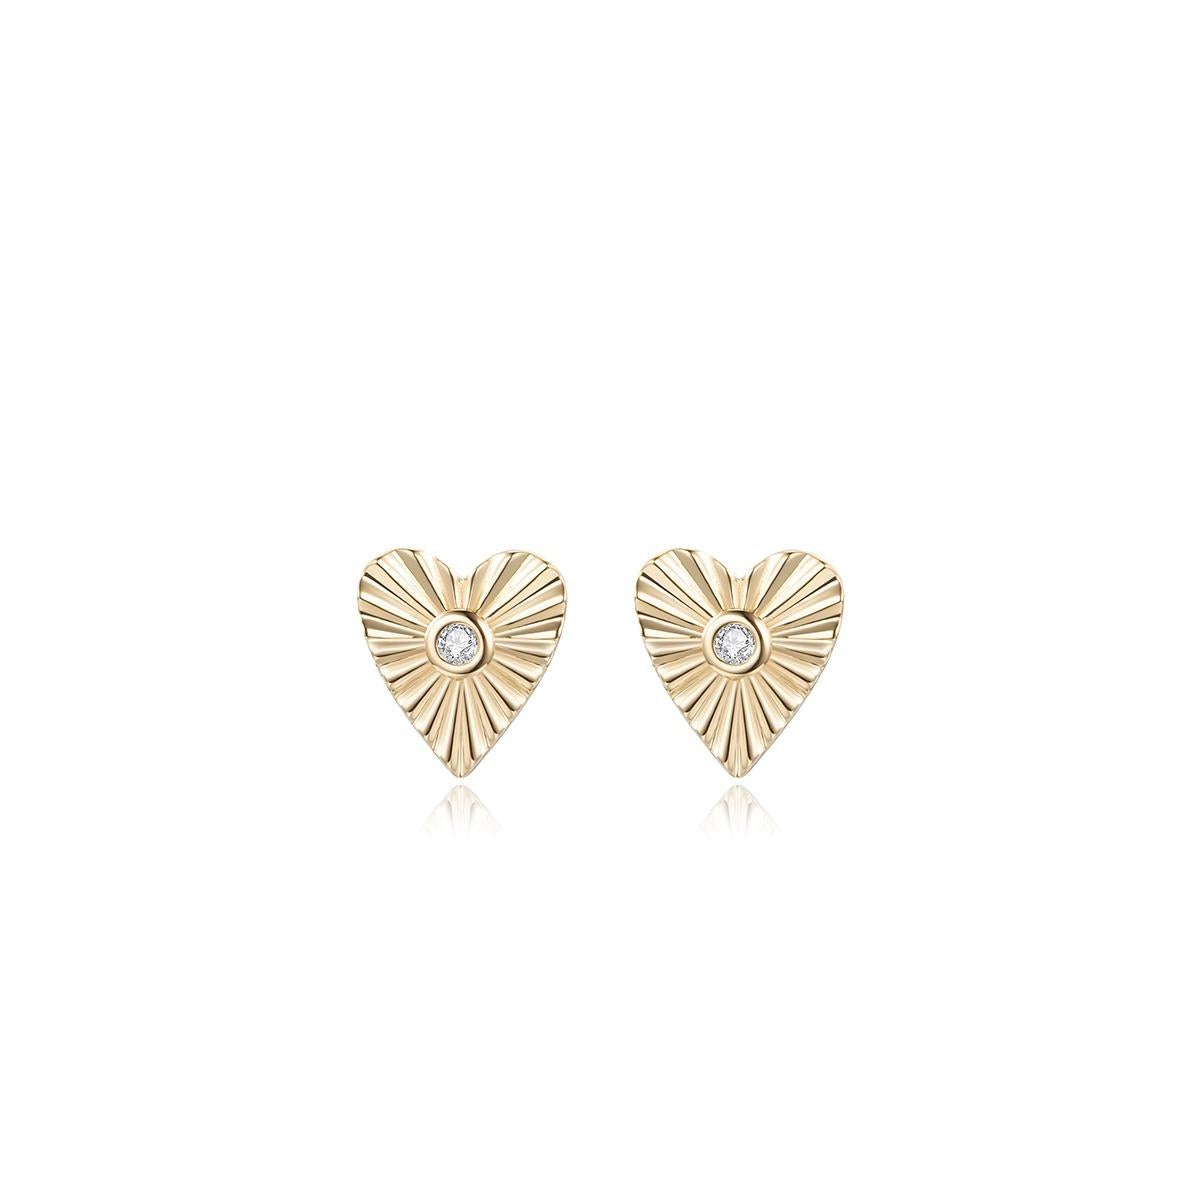 Earring Information
Diamond Type : Natural Diamond
Metal : 14k
Metal Color : Yellow Gold
Diamond Shape : Round Diamond
Diamond Carat Weight : 0.03ttcw
Diamond Color-Clarity : G-SI
Size	: 9.5mm*8.5mm
Lead Time : 4-8 Weeks (If out of Stock)


JEWELRY